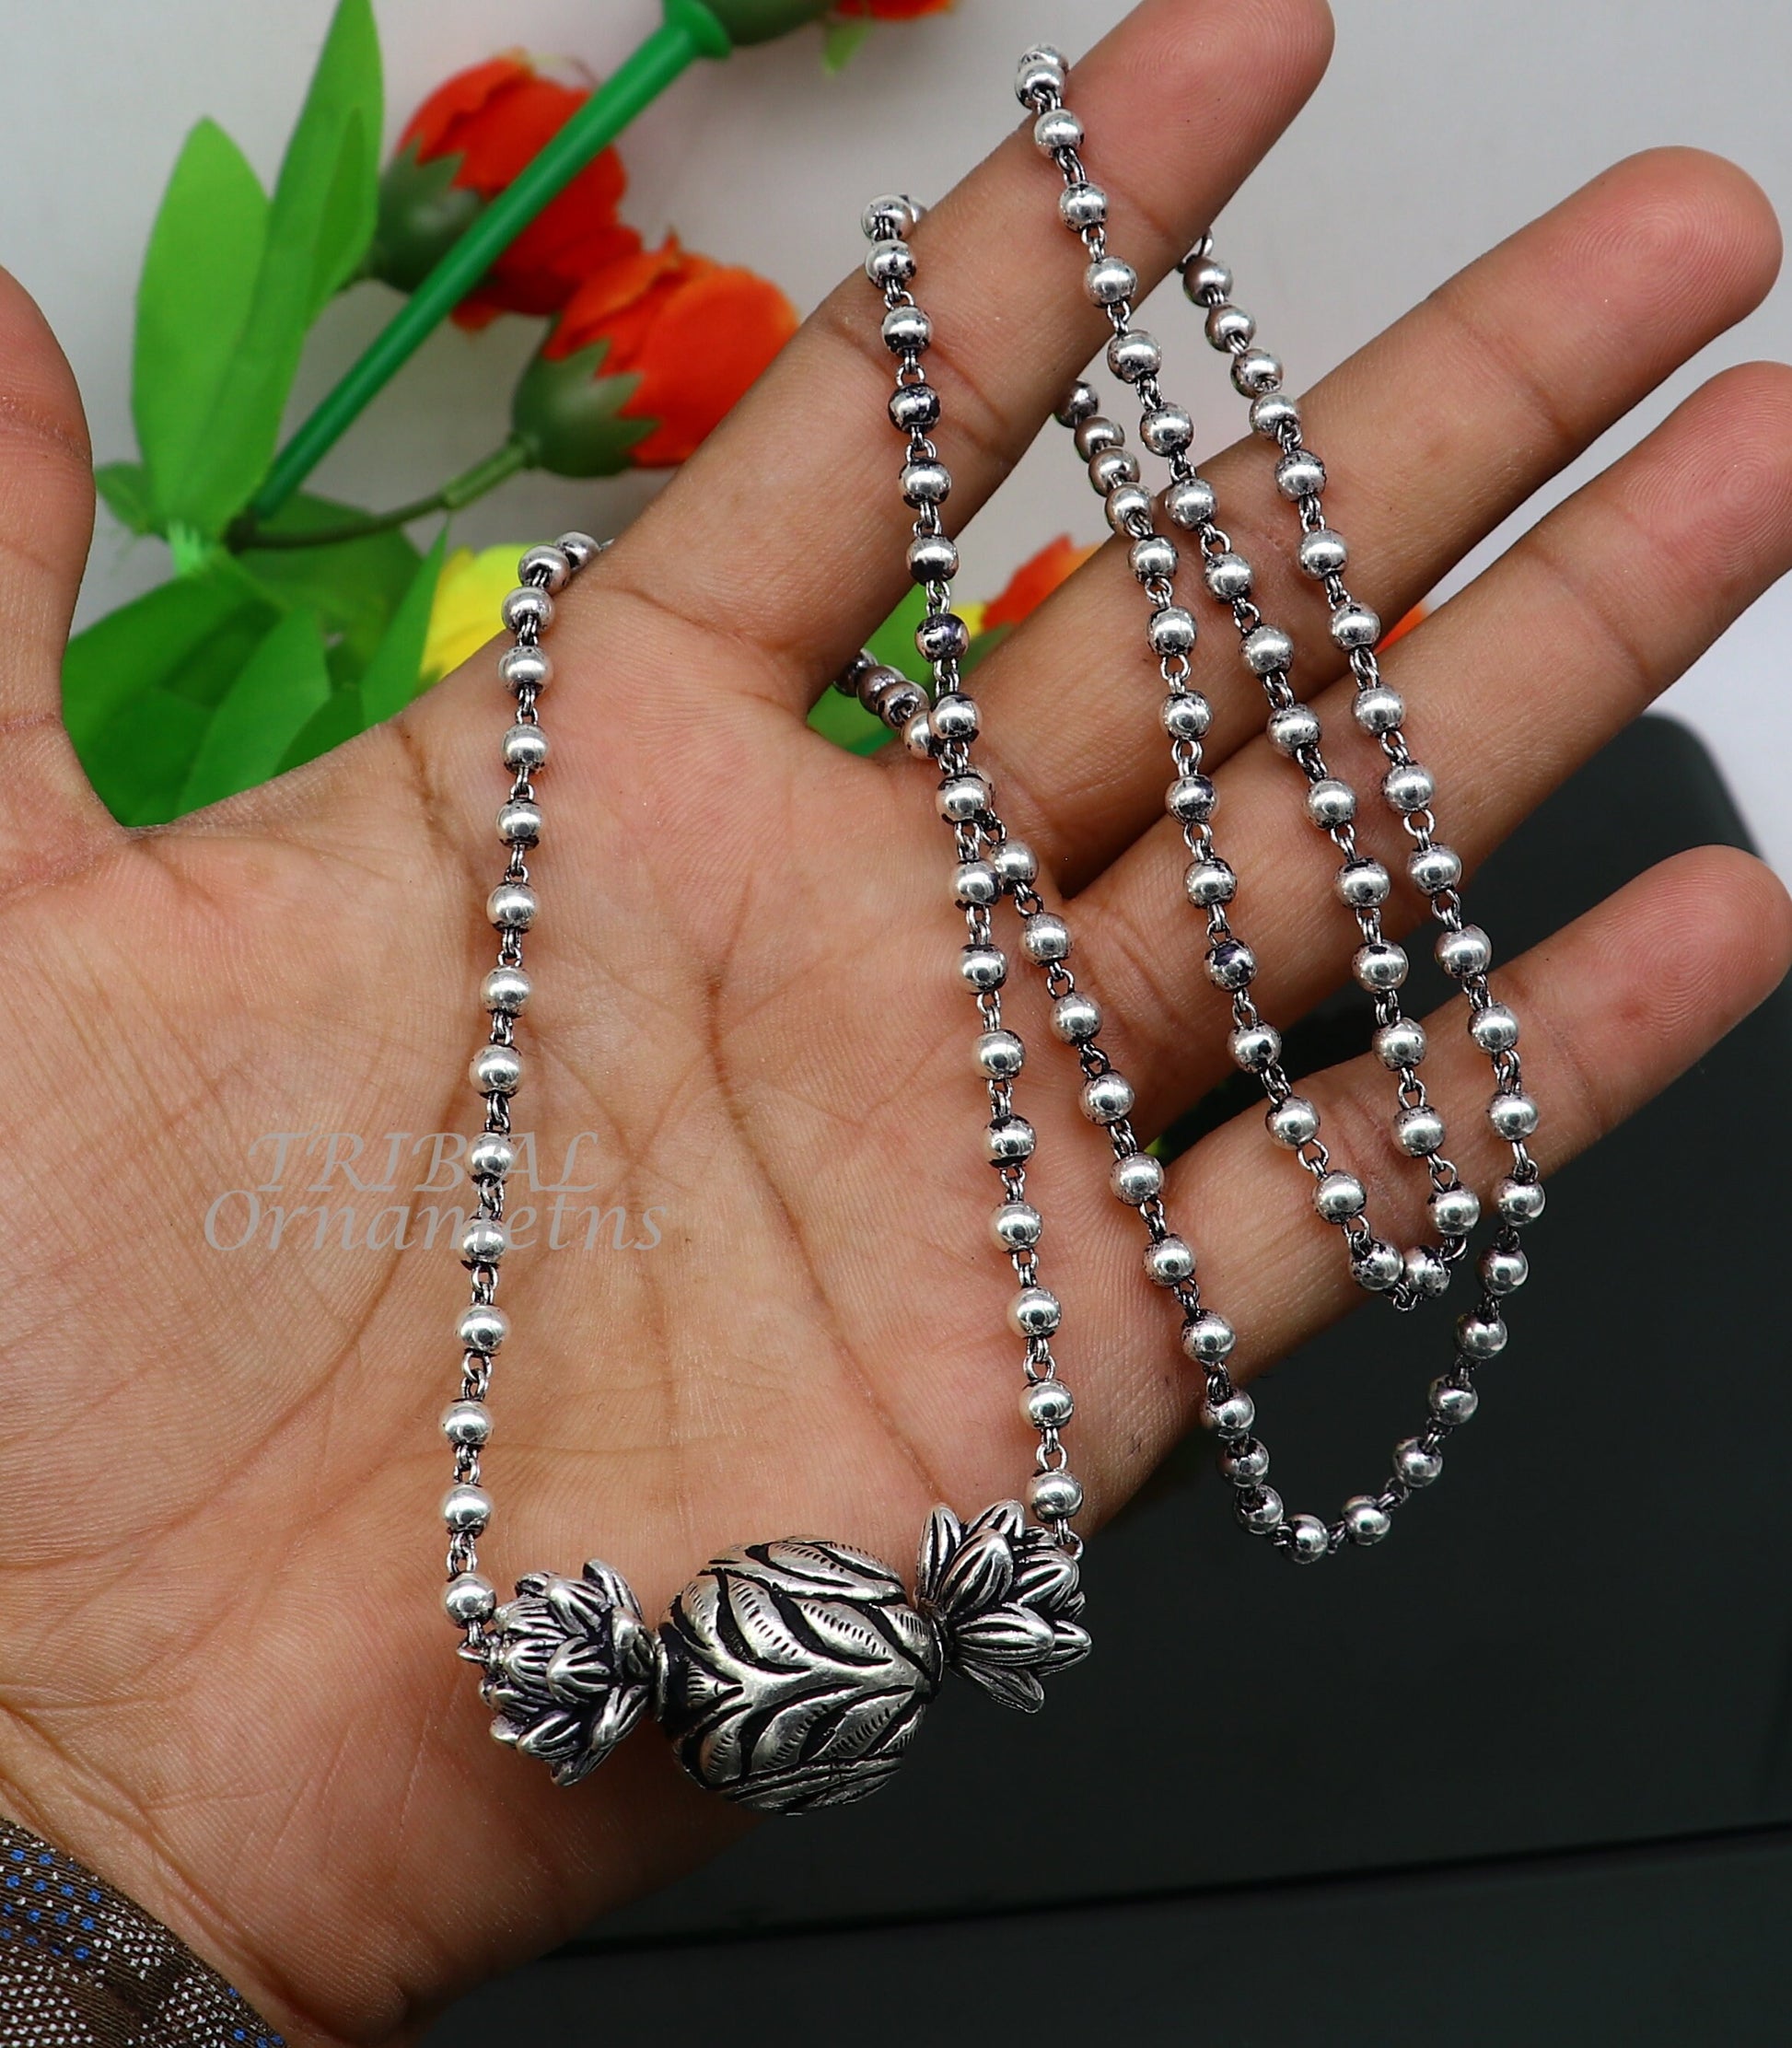 Unique Style Sterling Silver Bead Necklace